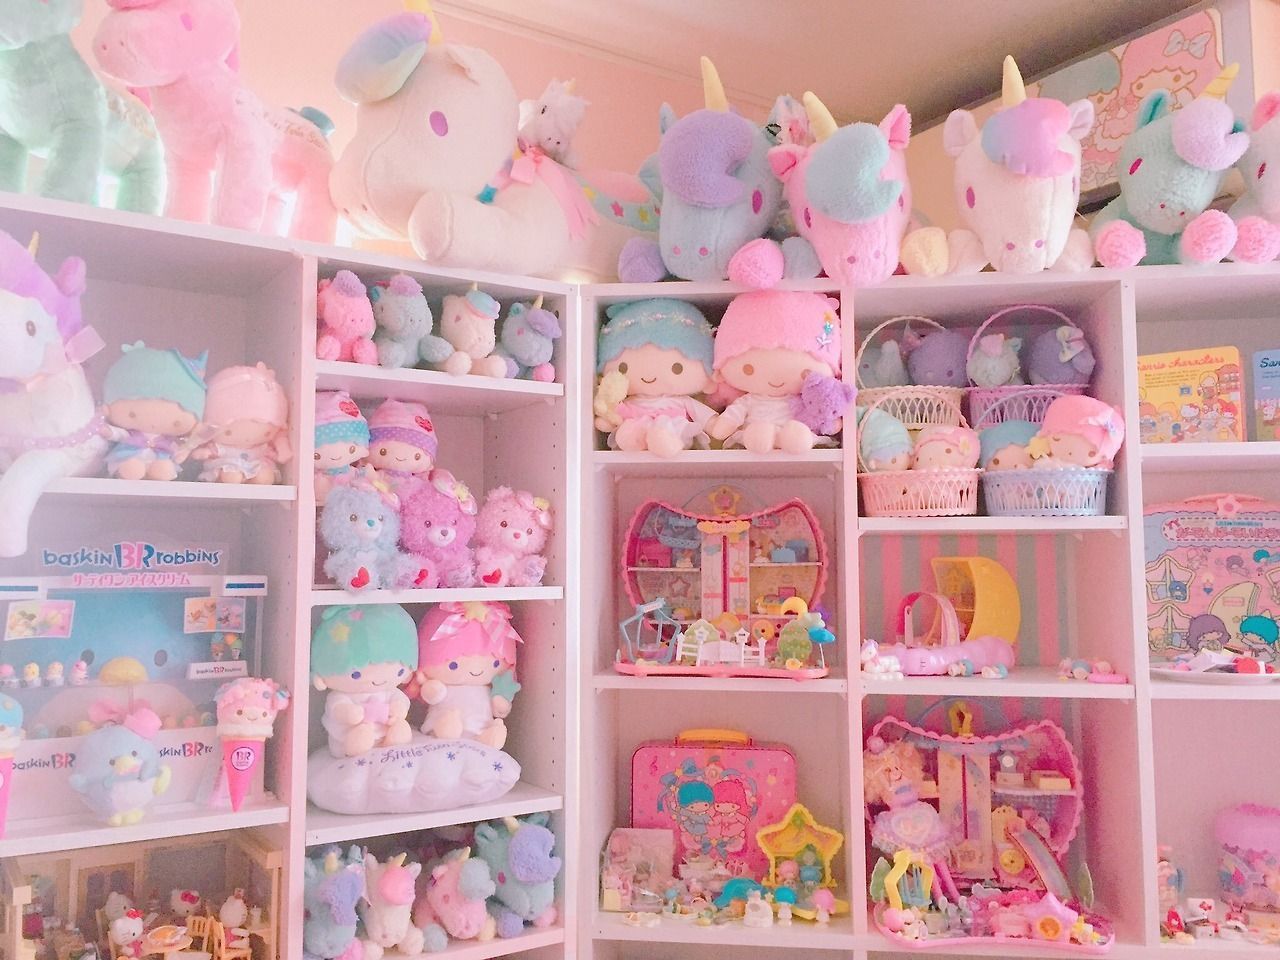 Kawaii room décor is a perfect outlet for those who wish to add a little flash and color to their homes. Learn about Kawaii here.